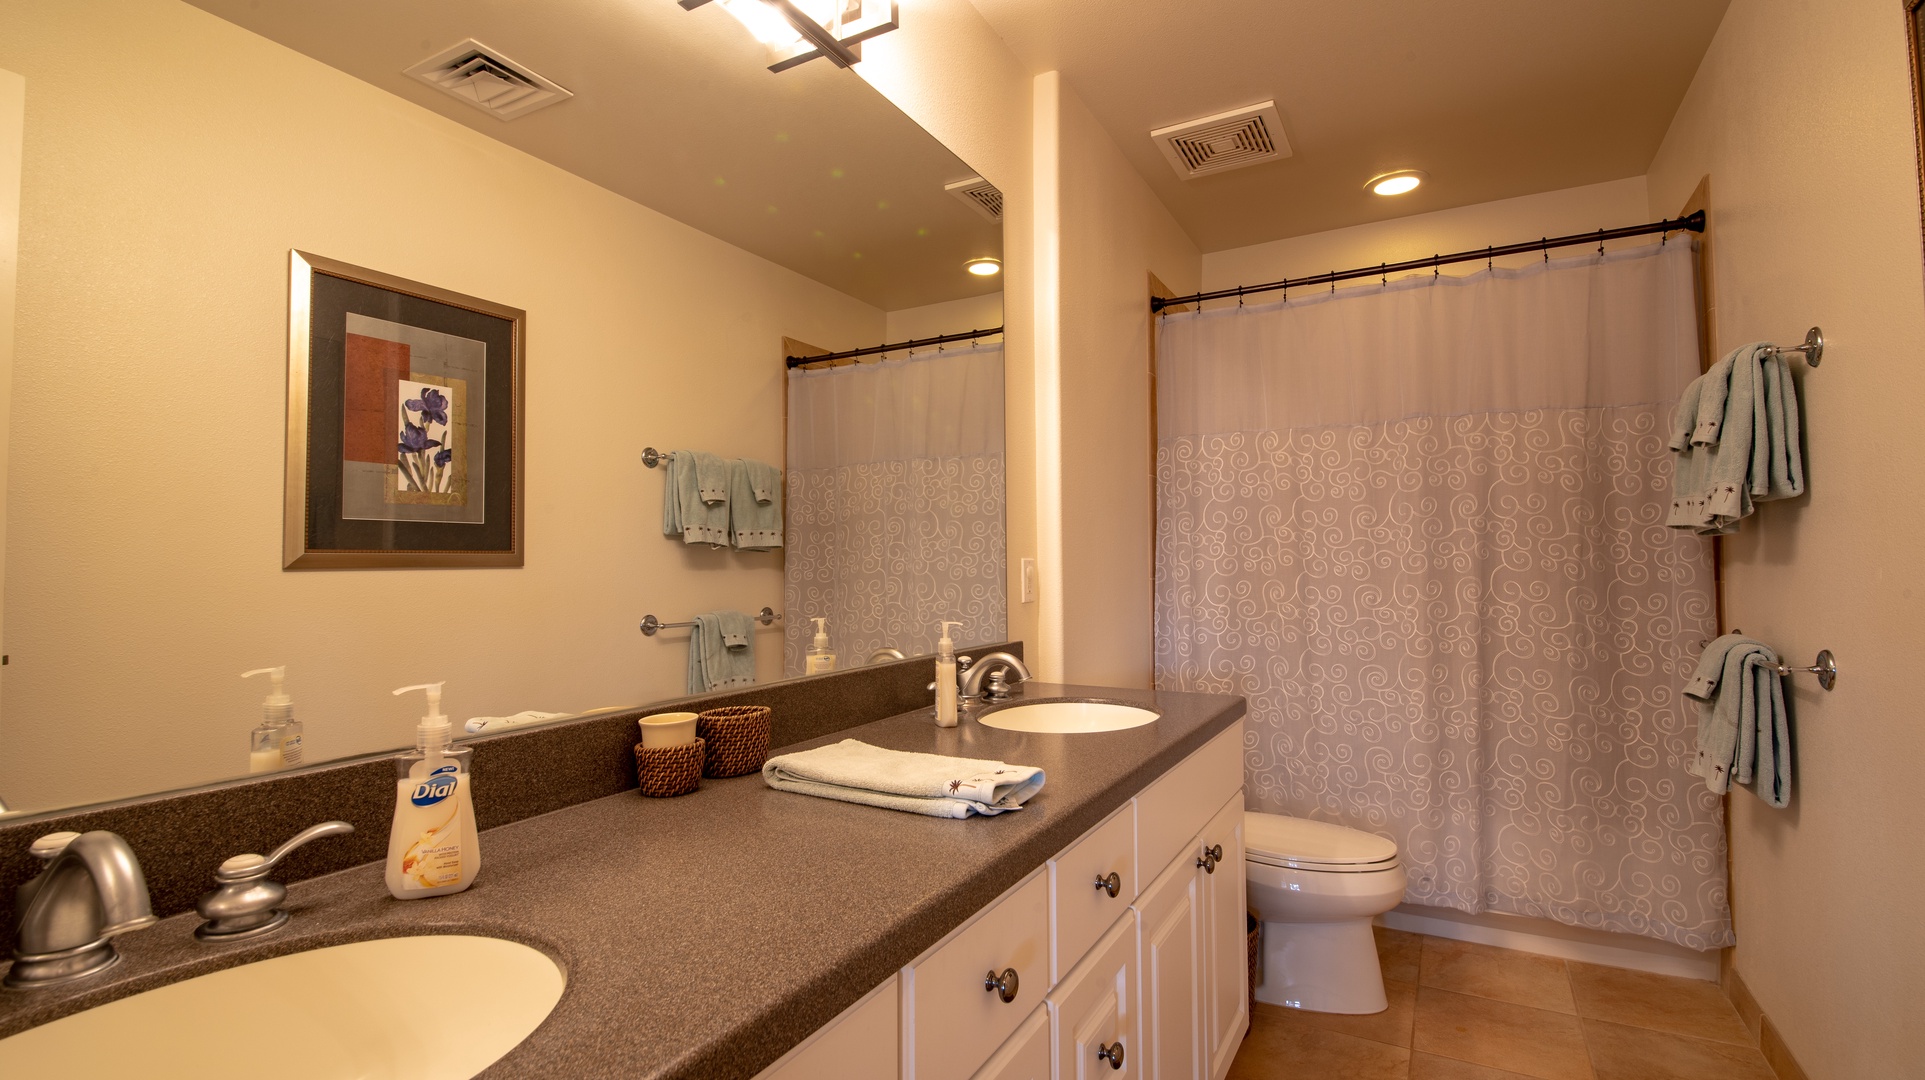 Kapolei Vacation Rentals, Ko Olina Kai 1047B - The primary guest bathroom with framed art and ample lighting.